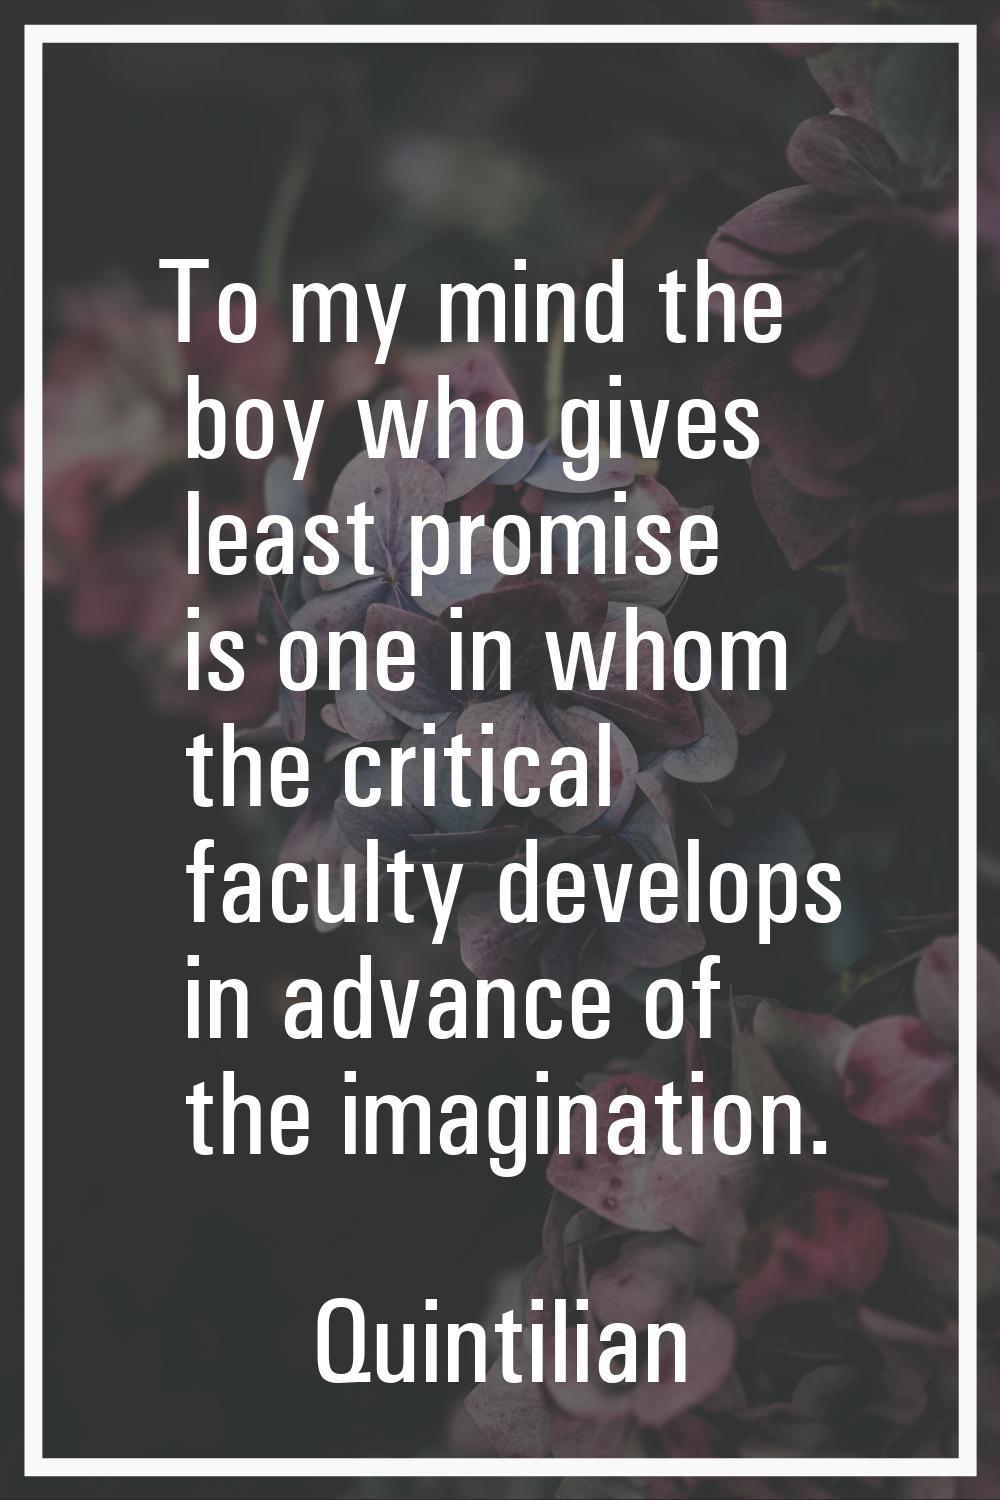 To my mind the boy who gives least promise is one in whom the critical faculty develops in advance 